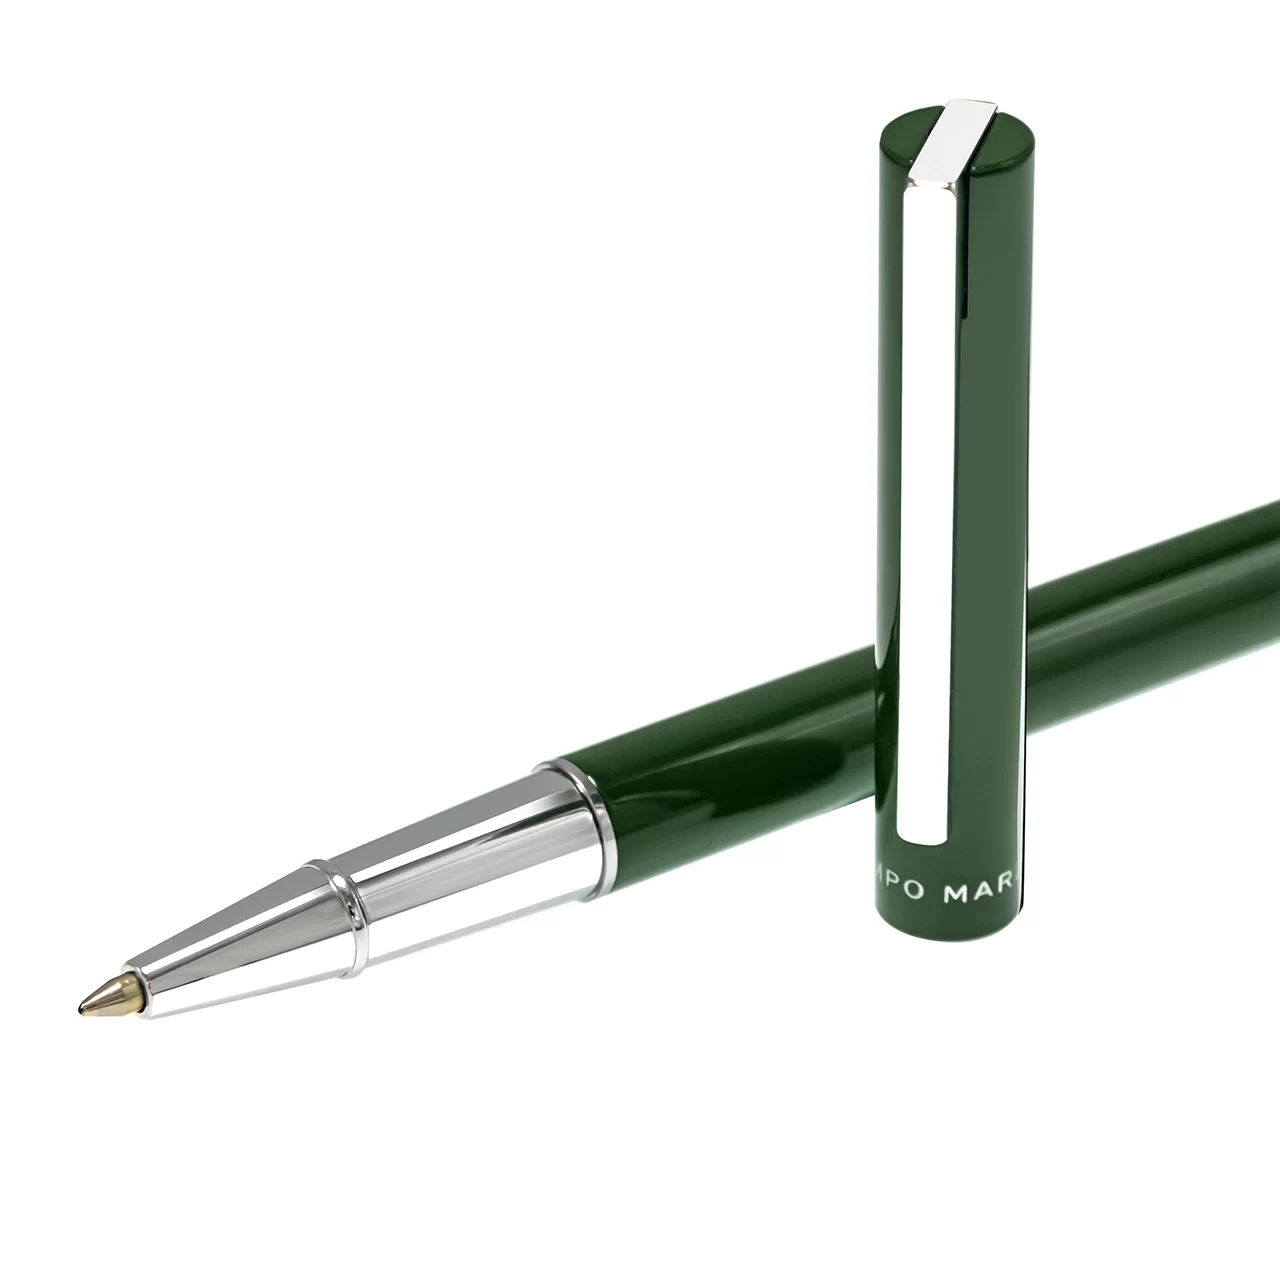 a close up of a green mont blanc ballpoint pen with silver details and its cap stanting beside it